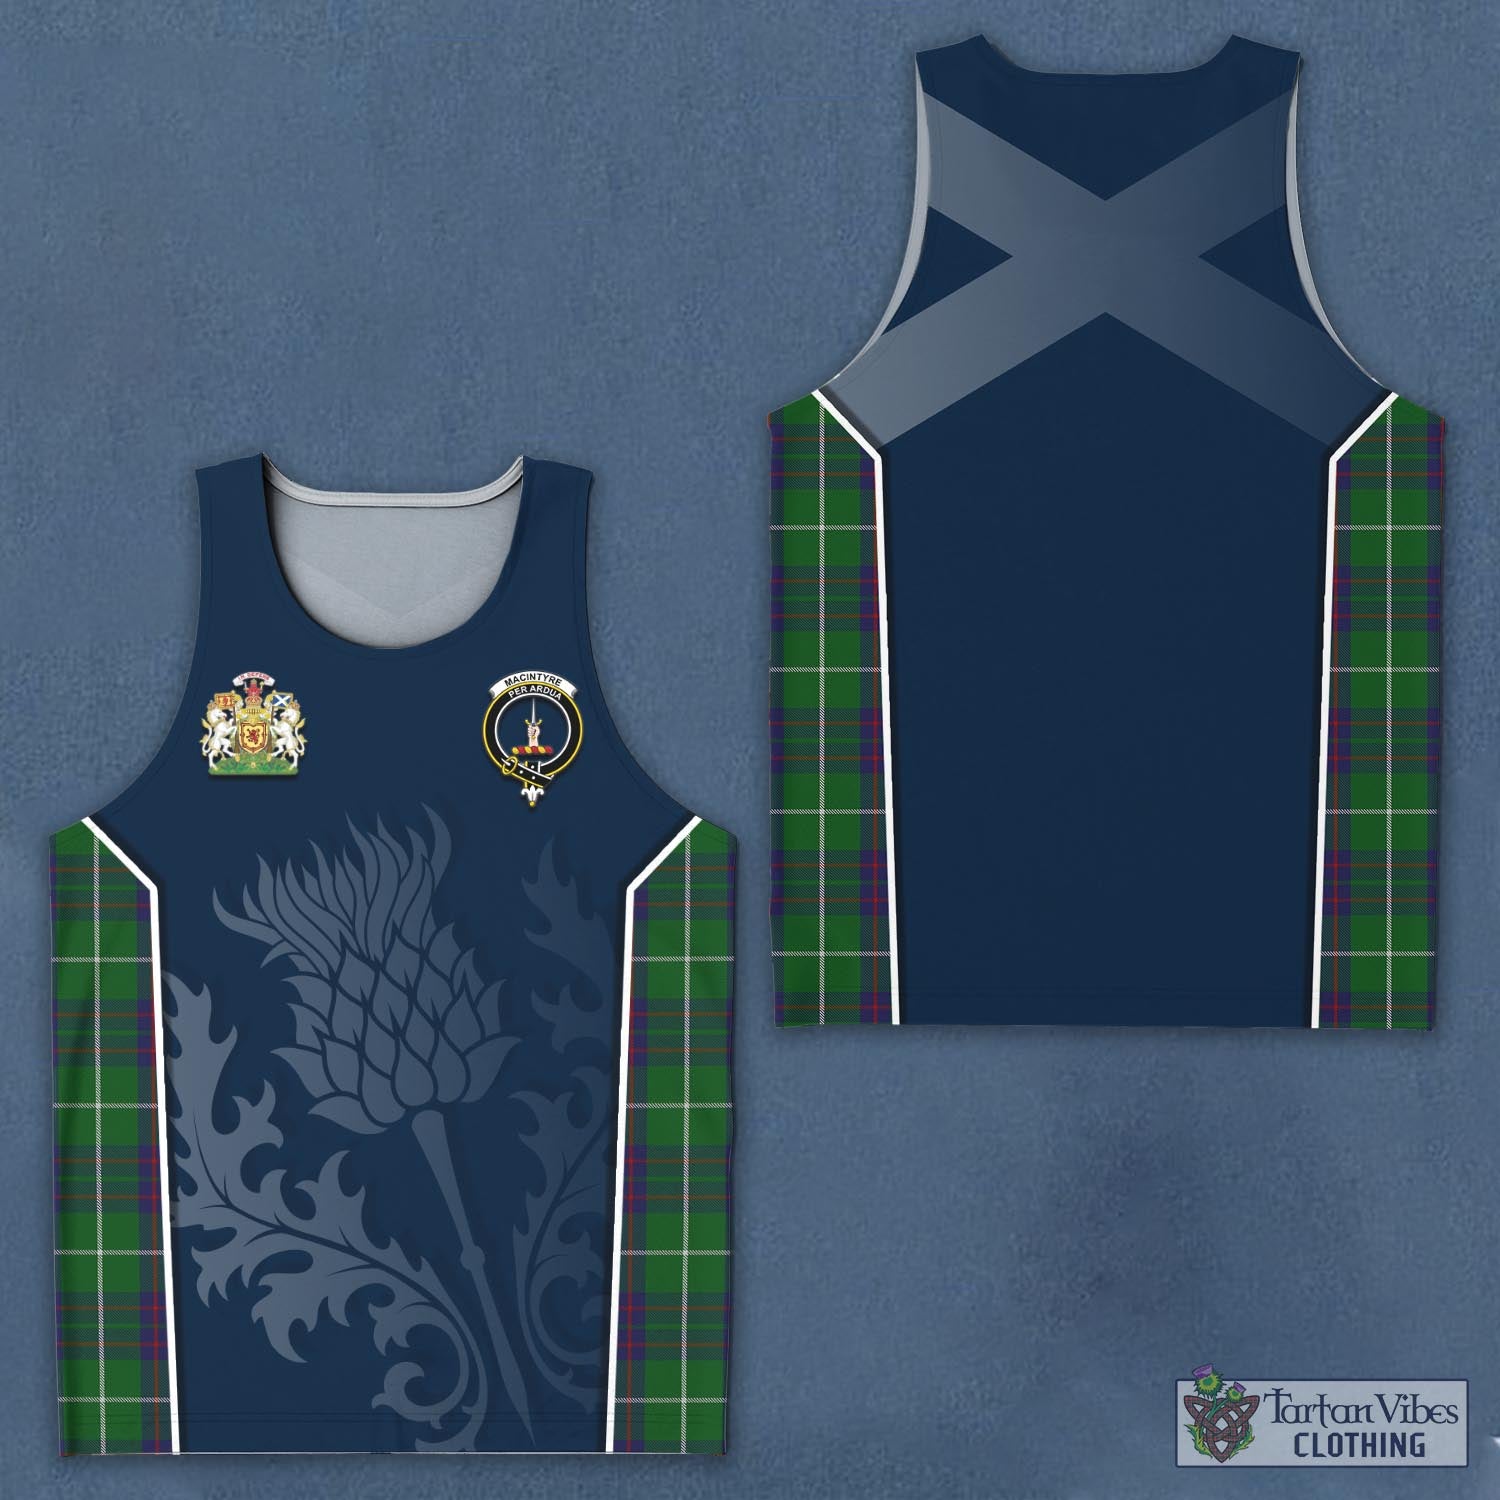 Tartan Vibes Clothing MacIntyre Hunting Tartan Men's Tanks Top with Family Crest and Scottish Thistle Vibes Sport Style